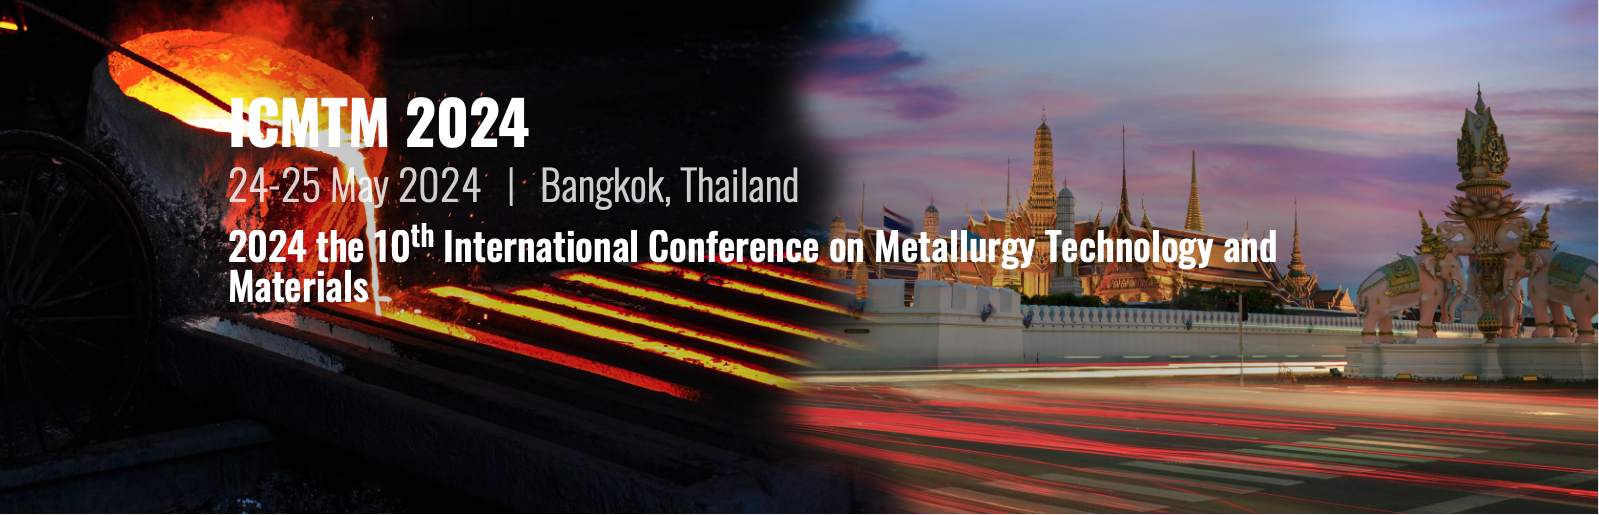 2024 the 10th International Conference on Metallurgy Technology and Materials (ICMTM2024)